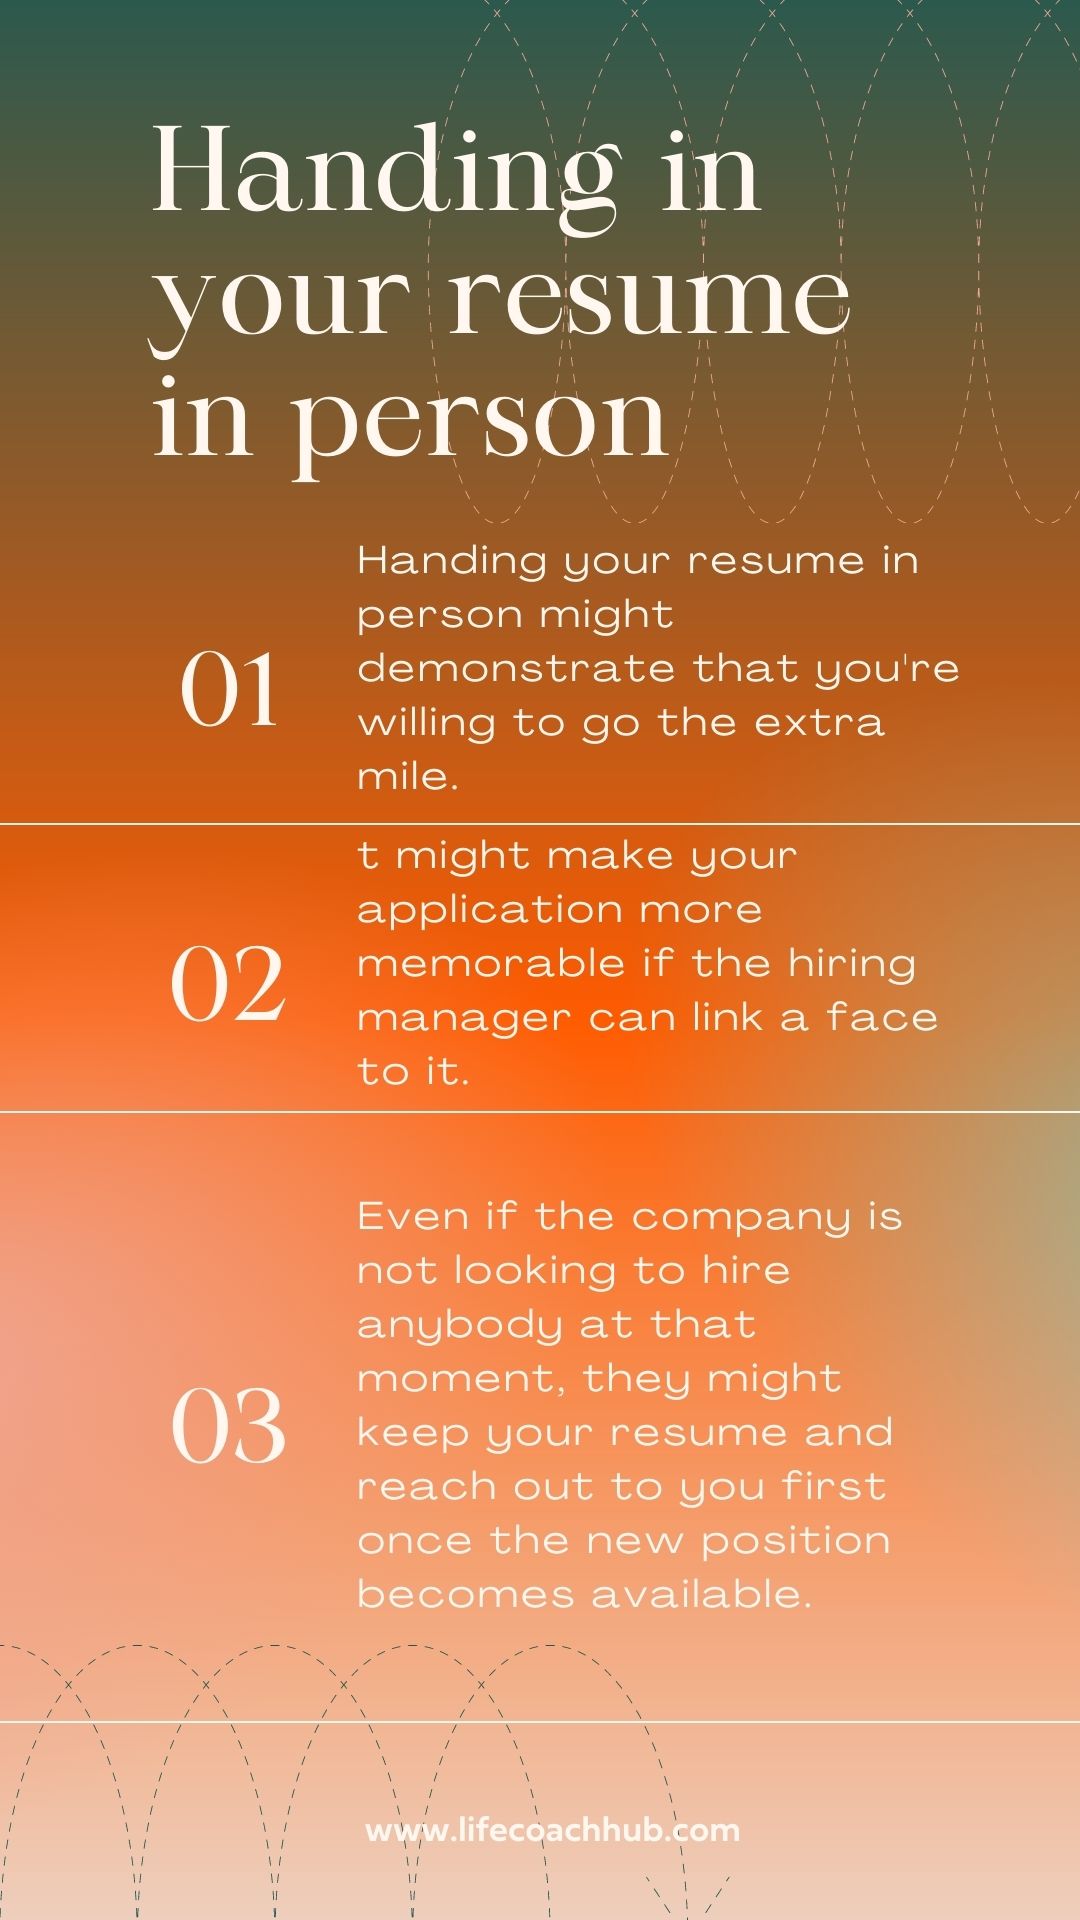 Handing your resume in person can be a good thing